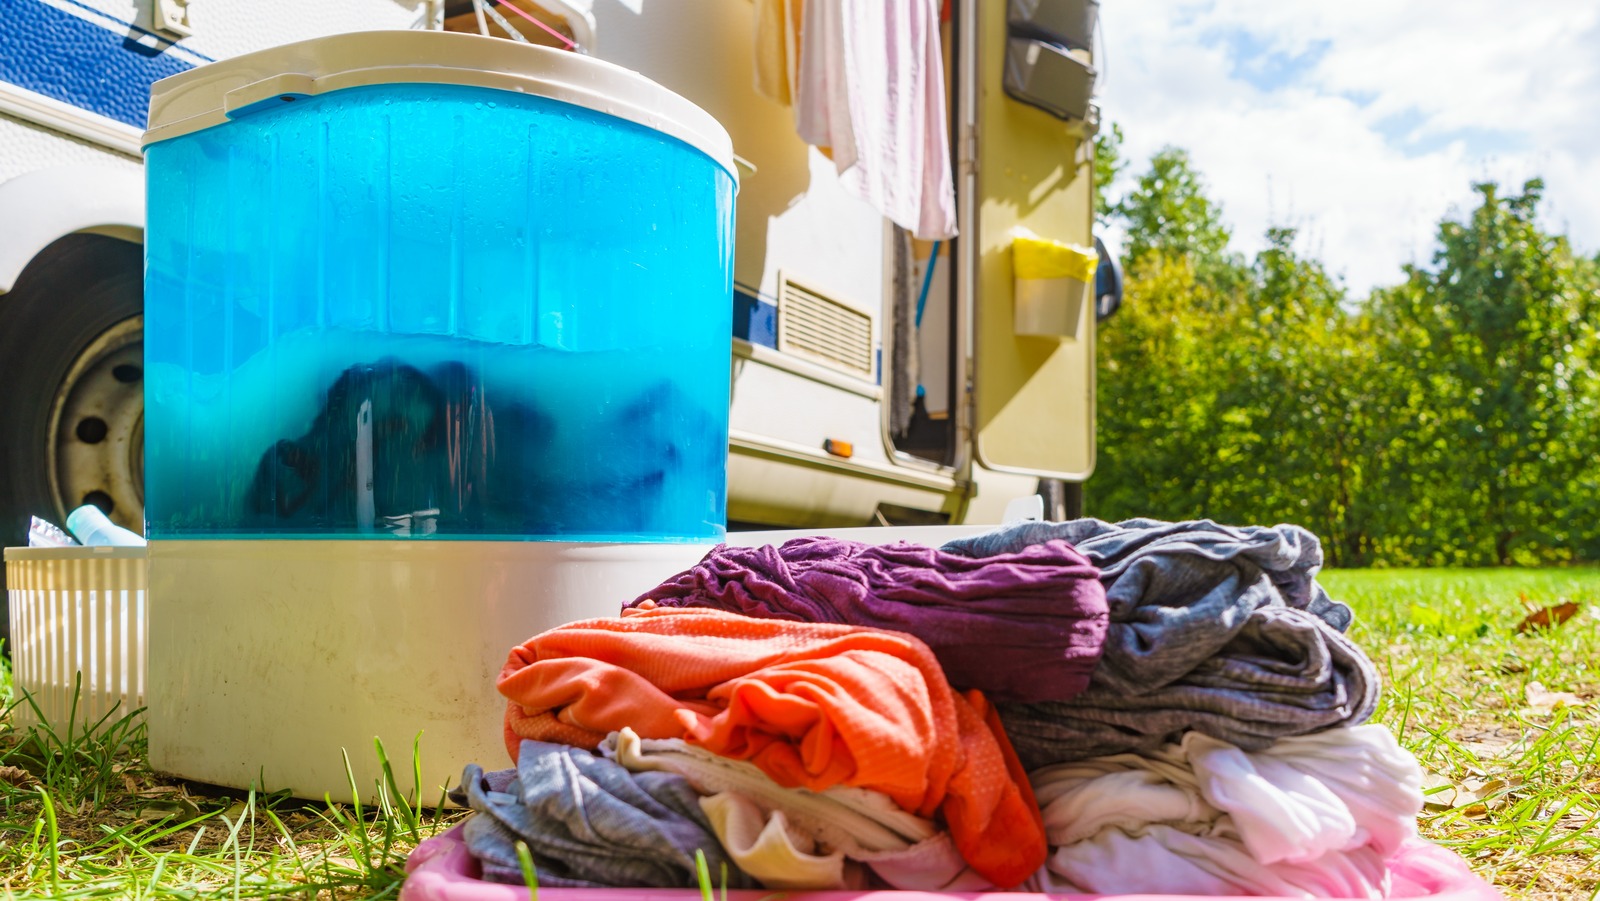 Portable washing machines that will cut down your trips to the laundromat